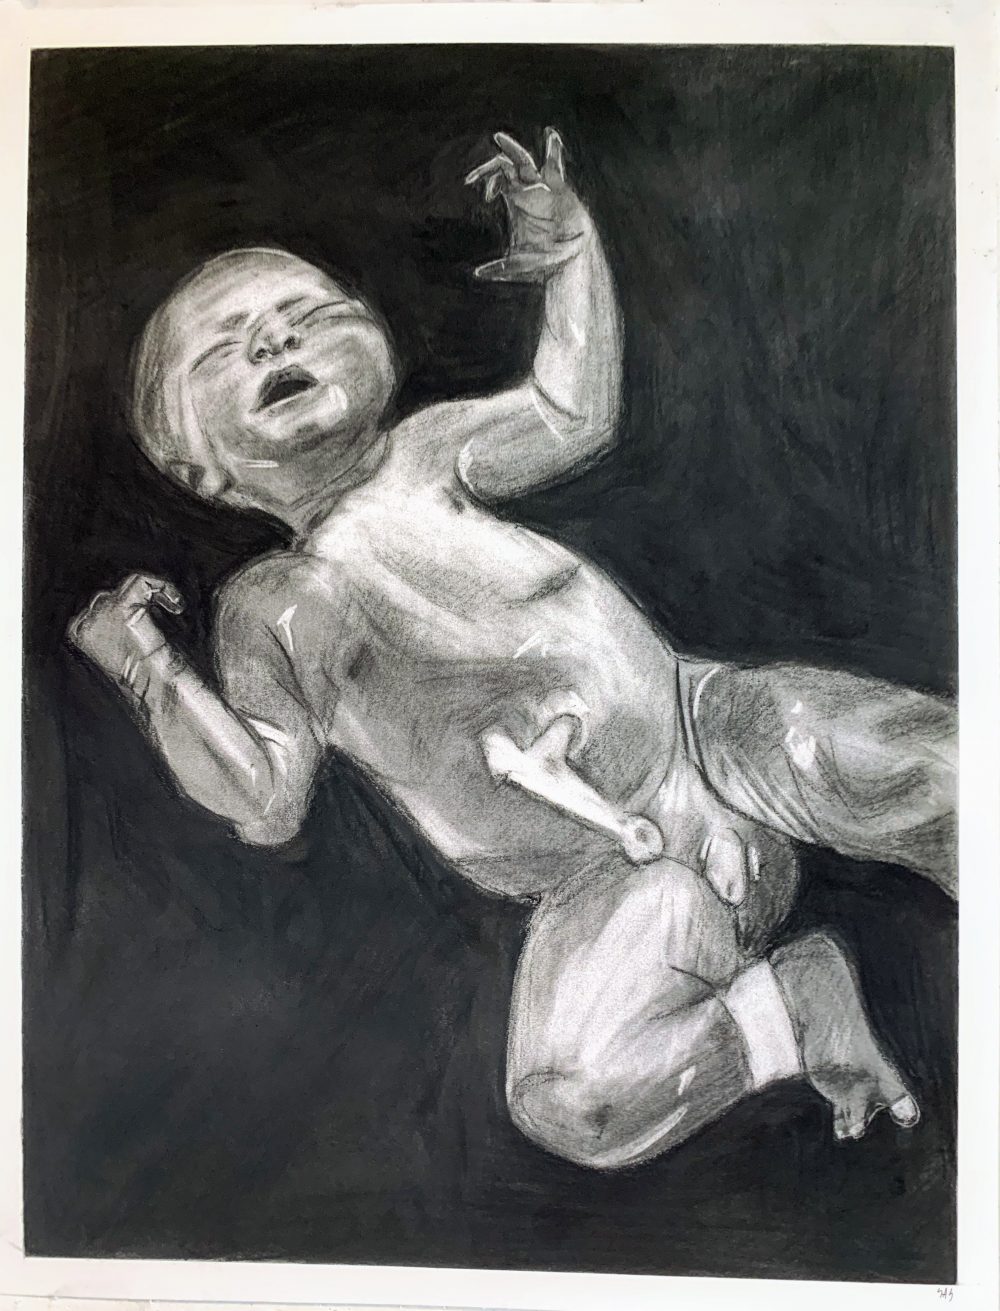 Shania Sweet, The Baby, 2019, charcoal and conte on paper, 24" x 18"